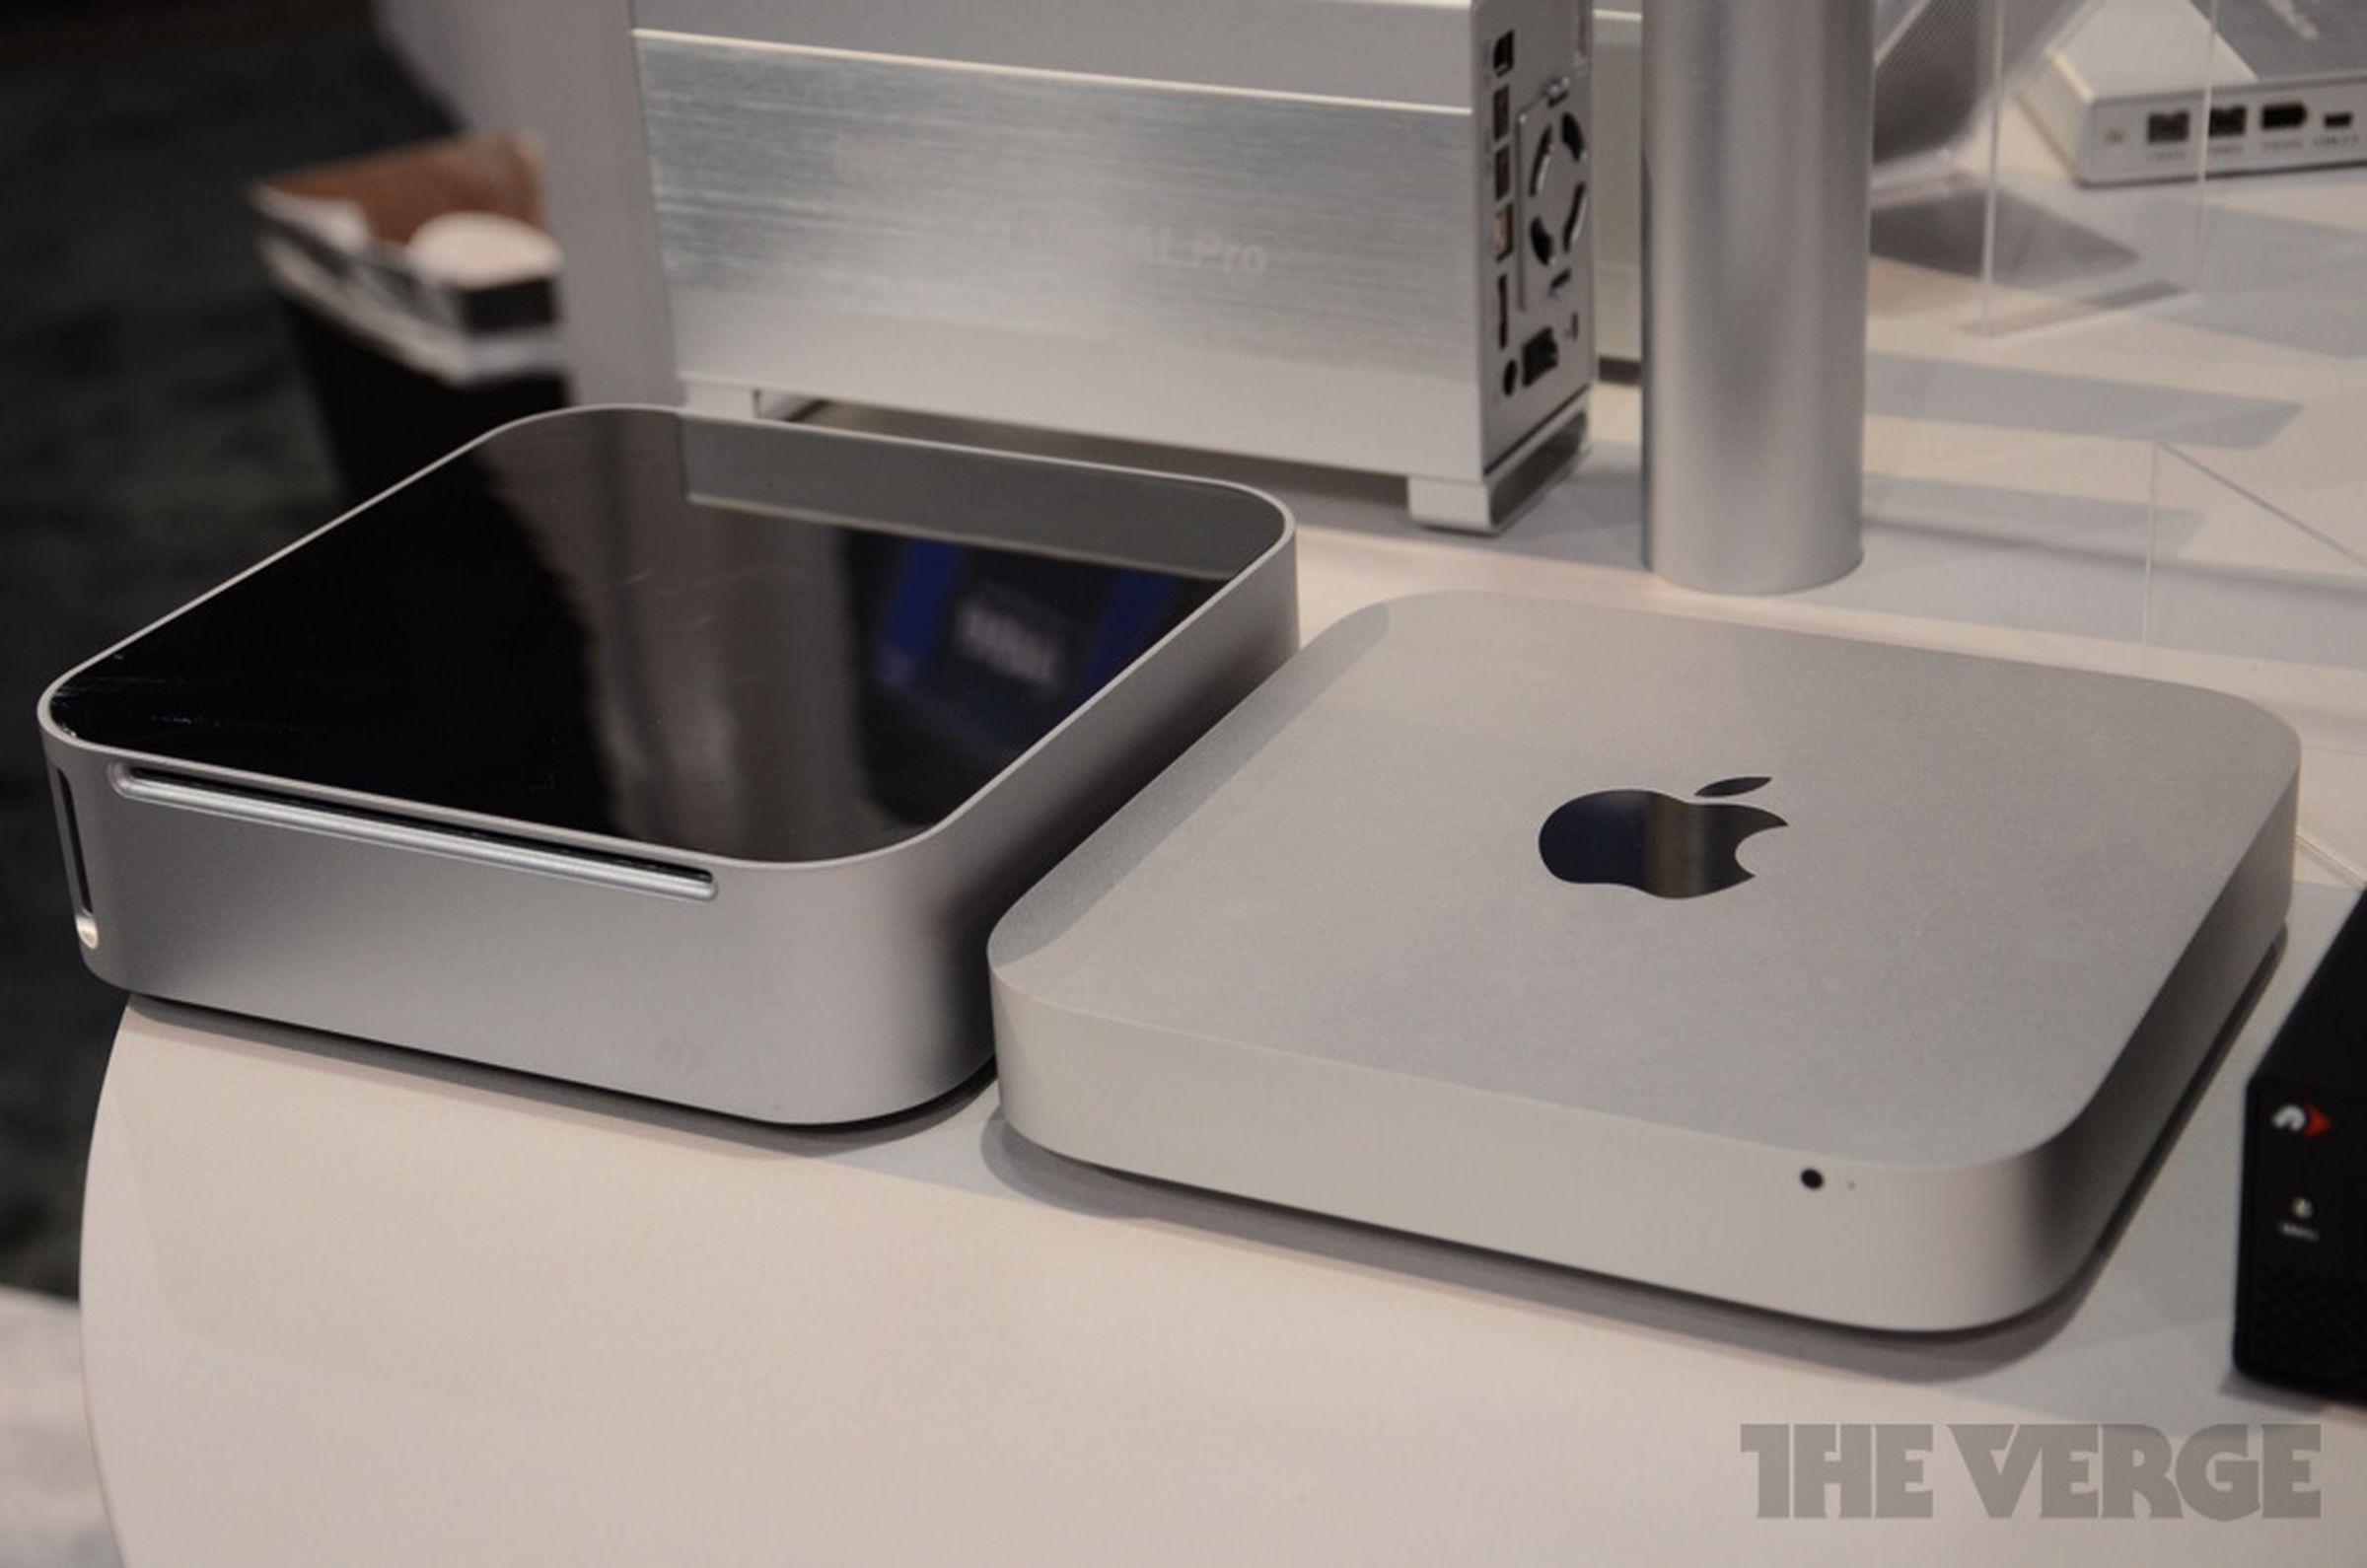 Newer Technology miniStack Max hands-on photos